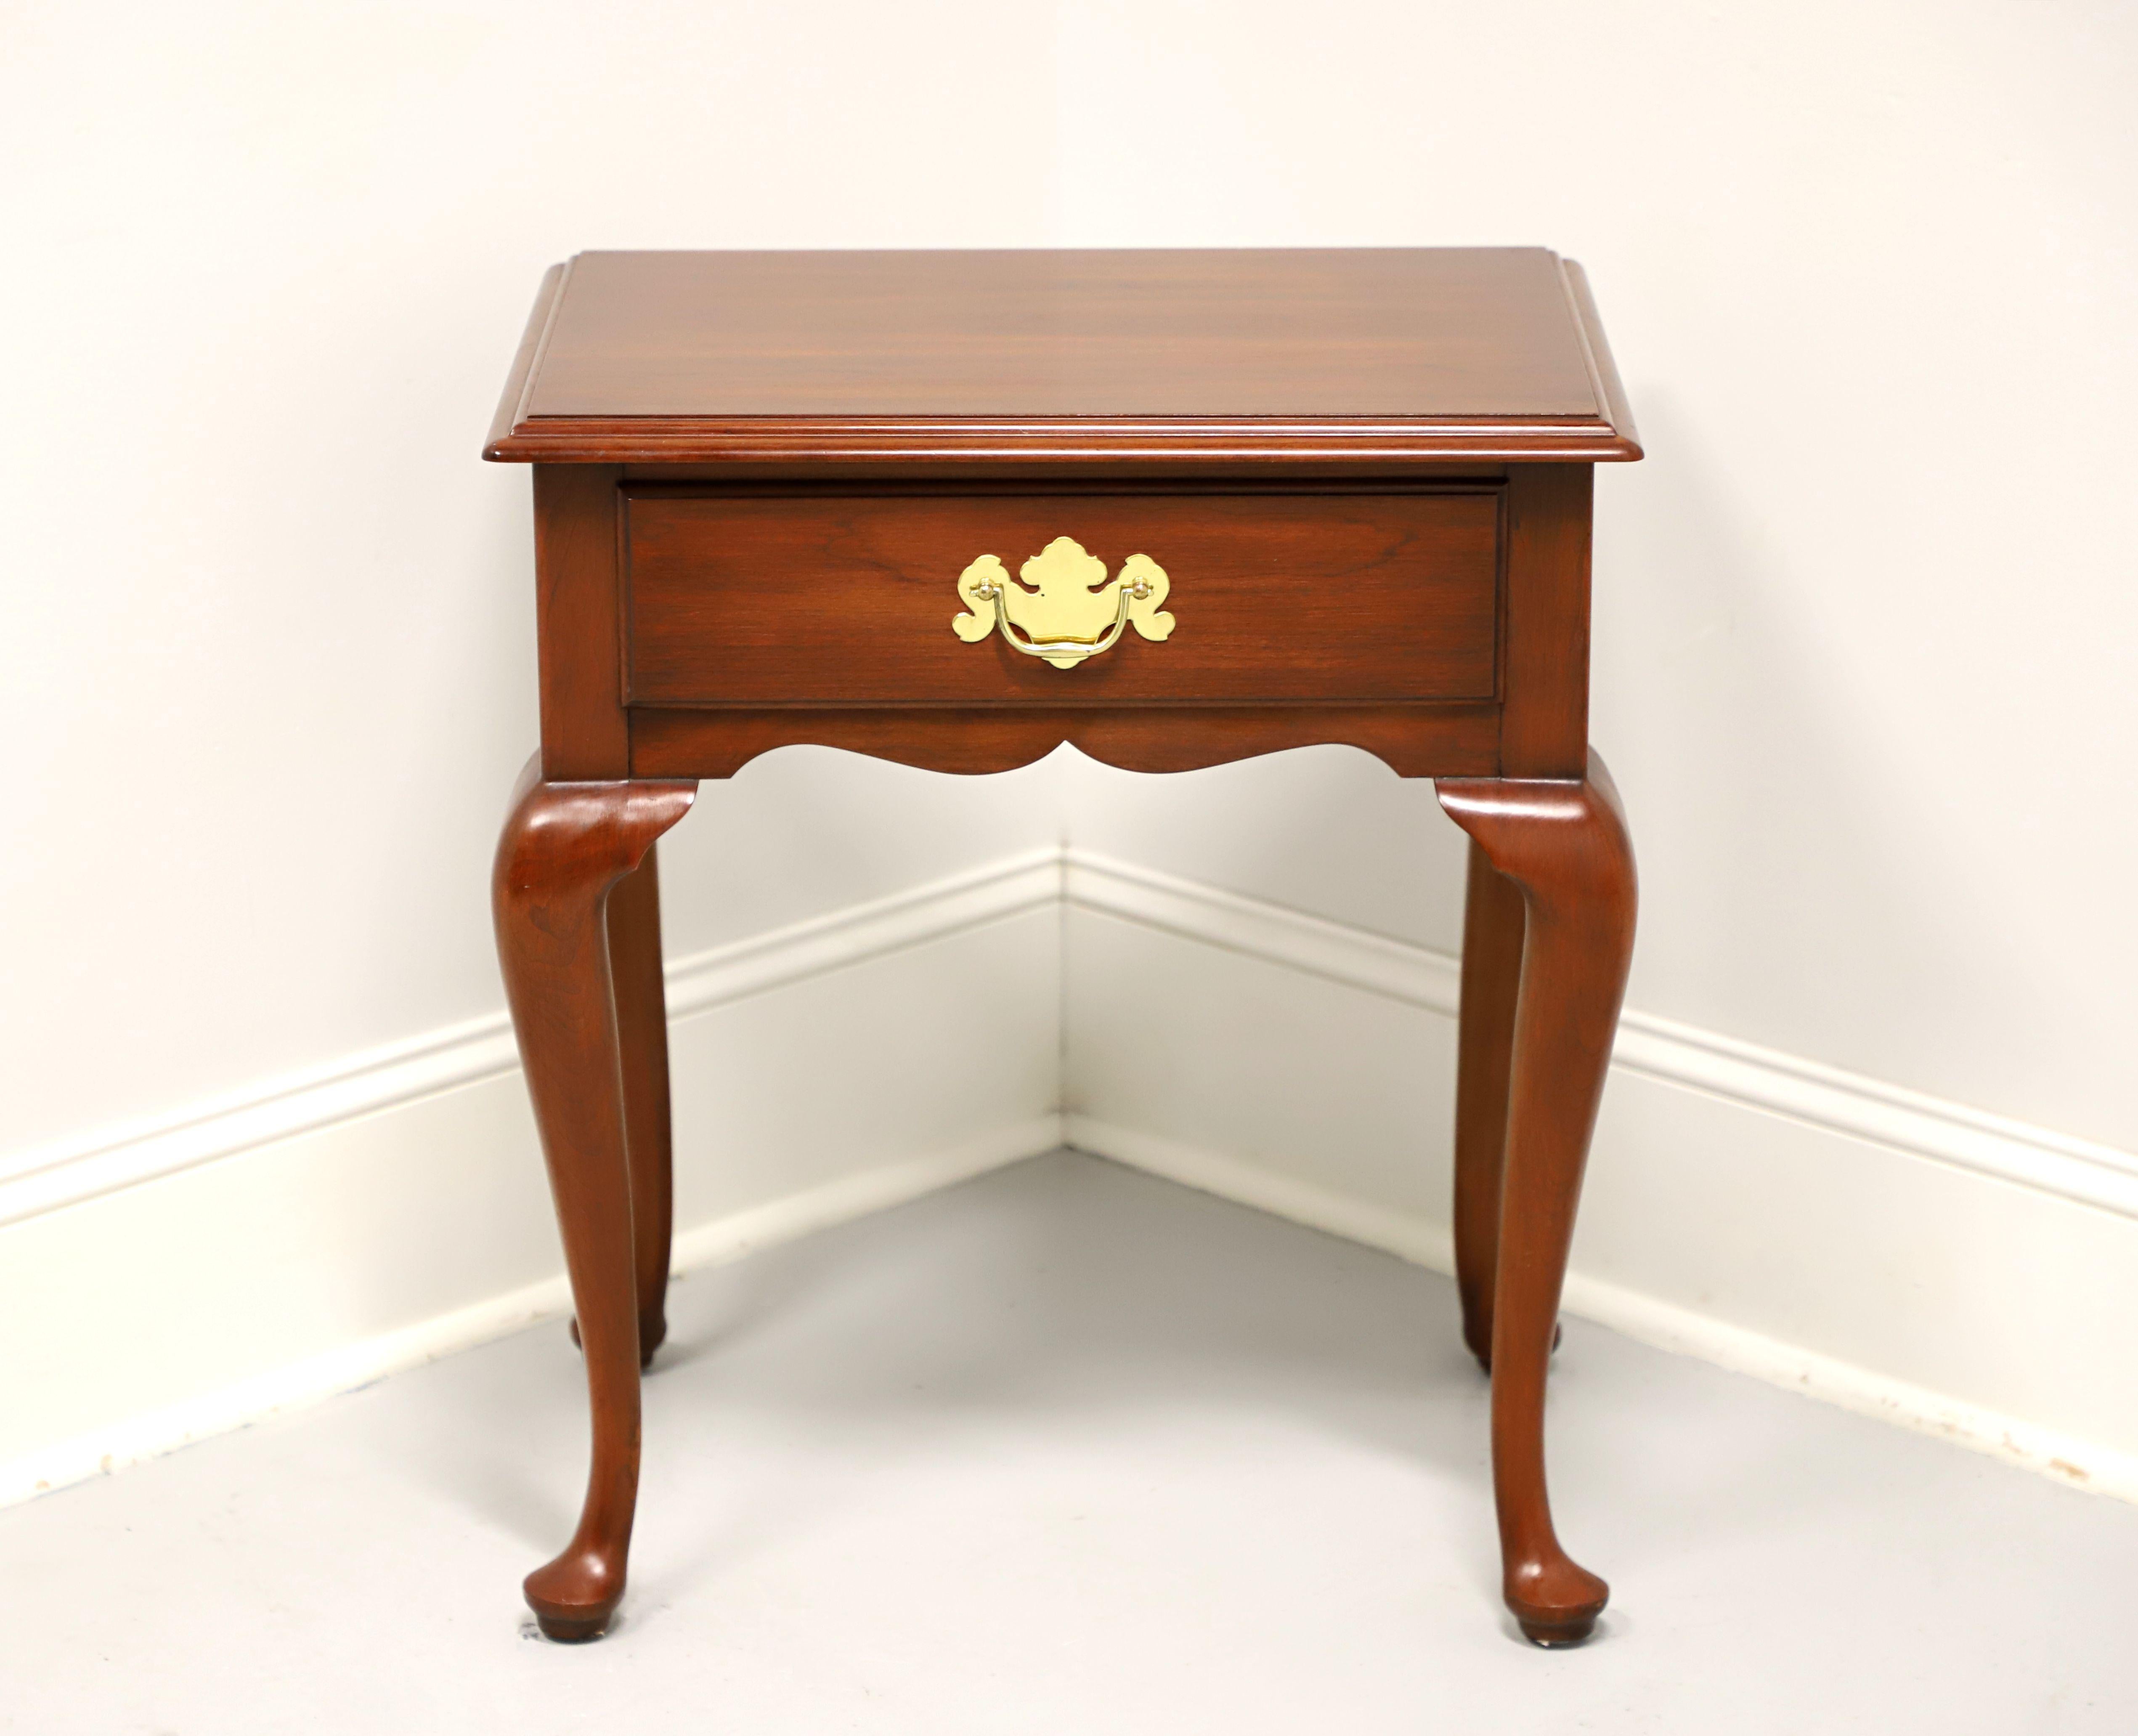 A Queen Anne style end table by Henkel Harris of Winchester, Virginia, USA. Solid wild black cherry wood with brass hardware, ogee edge to the top, carved apron, cabriole legs and pad feet. Features one drawer of dovetail construction. Made circa